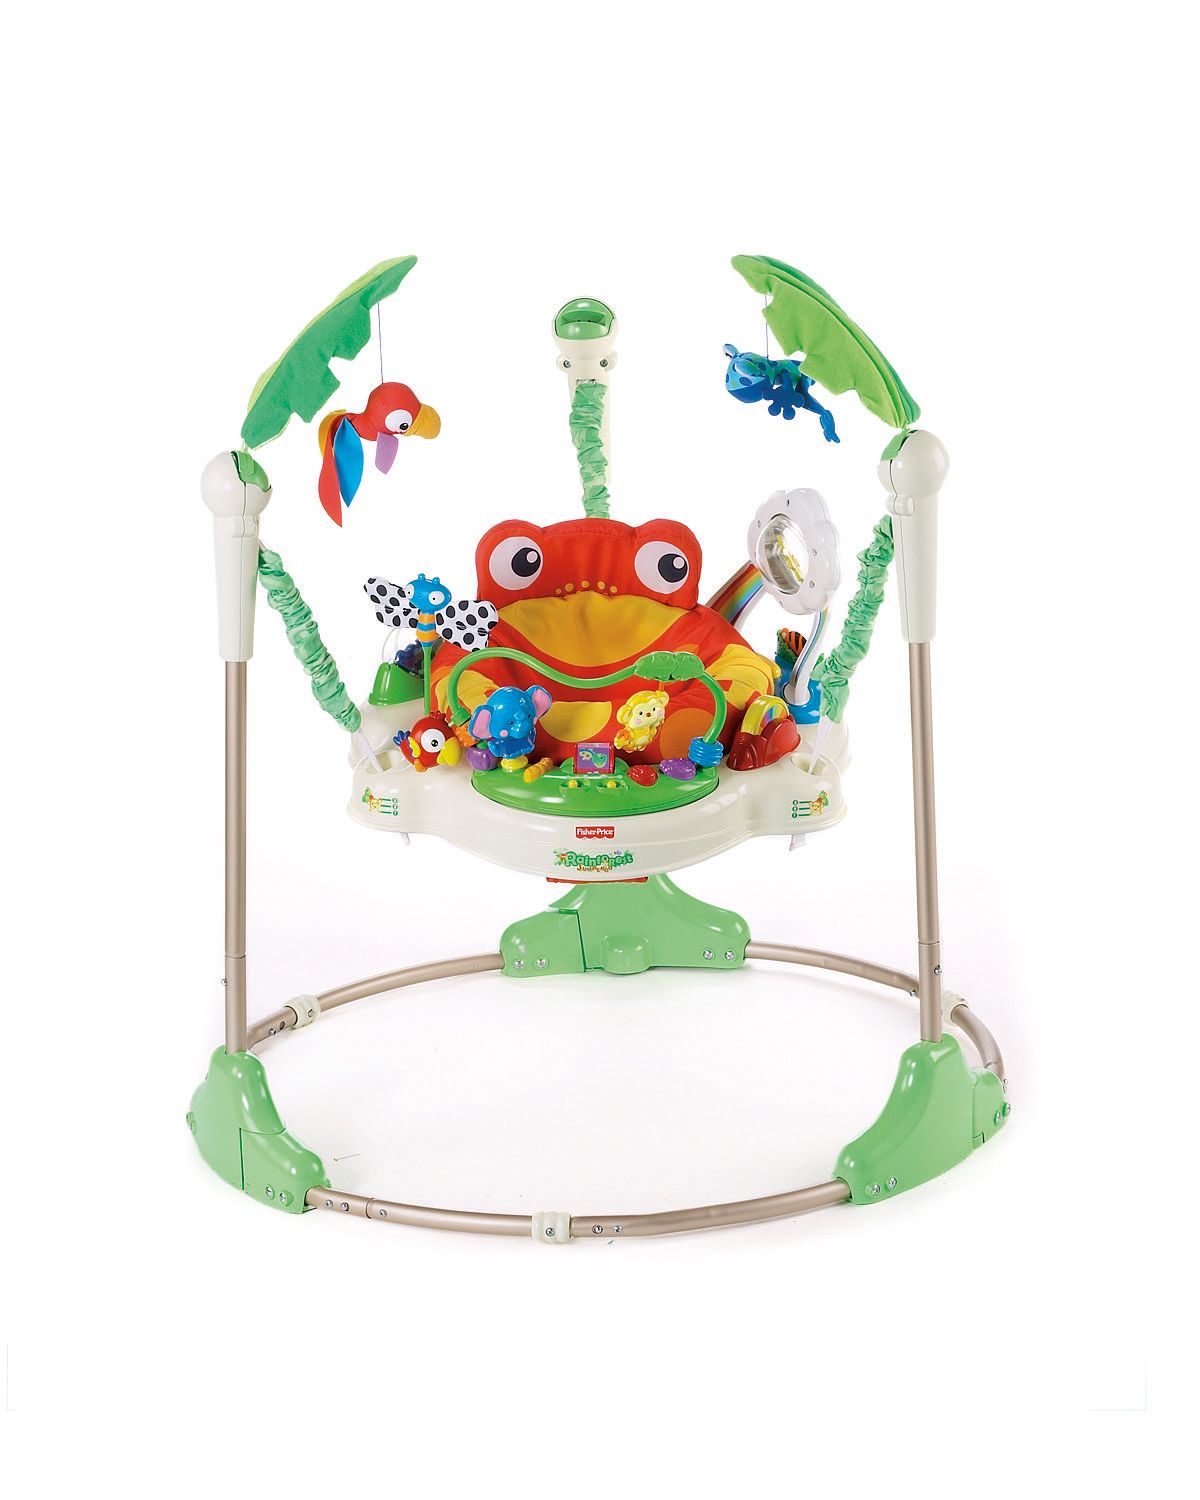 jumperoo price check